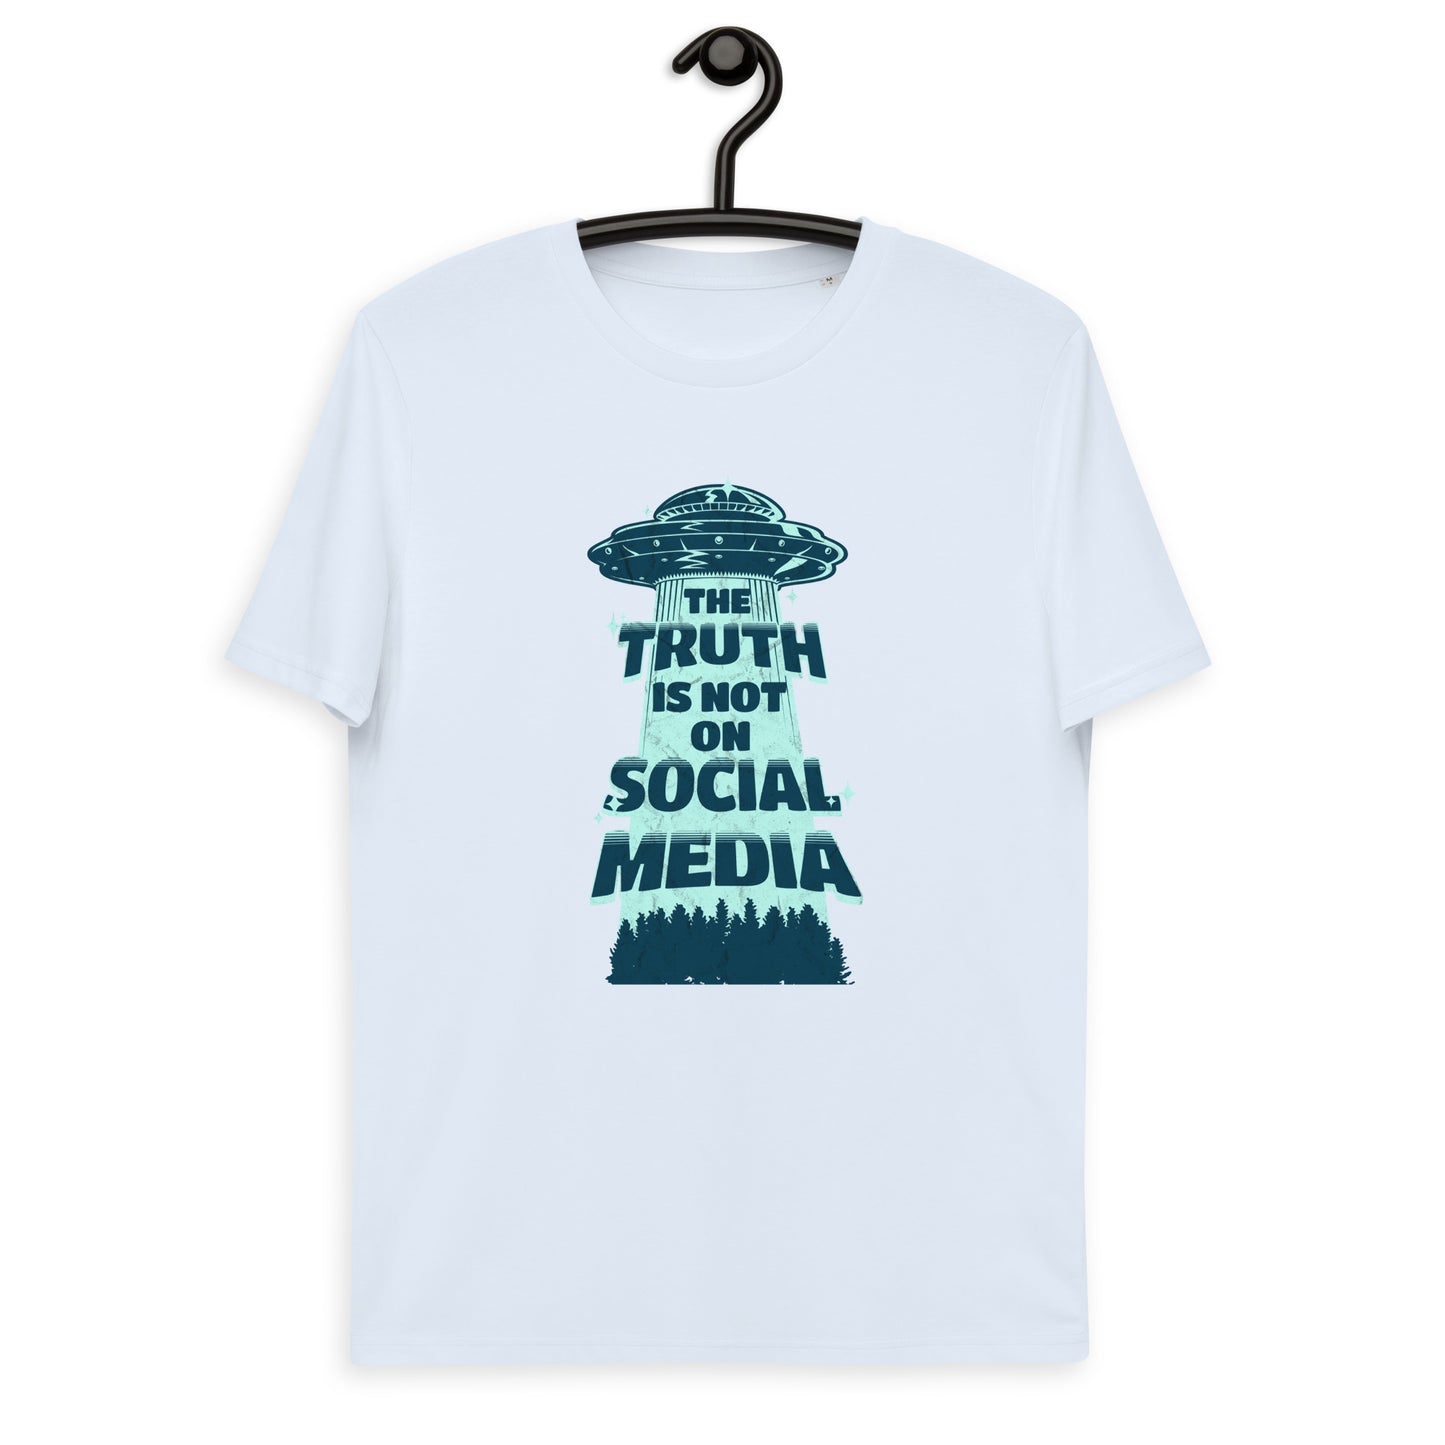 Unisex organic cotton t-shirt - The Truth Is Not On Social Media